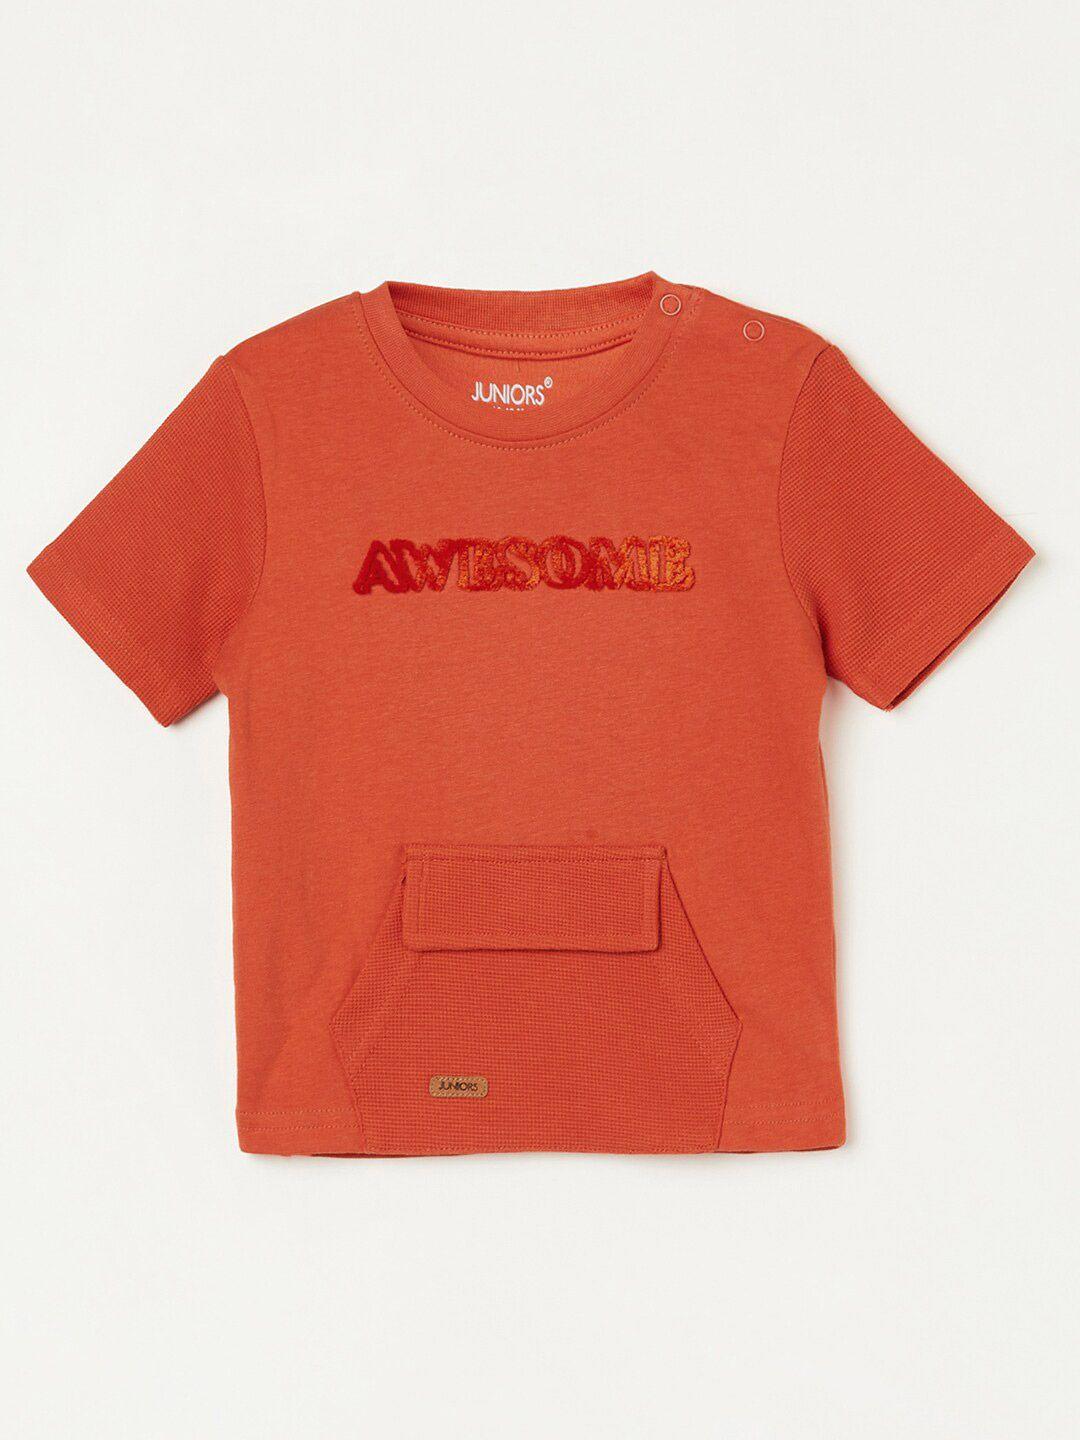 juniors-by-lifestyle-boys-orange-typography-printed-applique-t-shirt